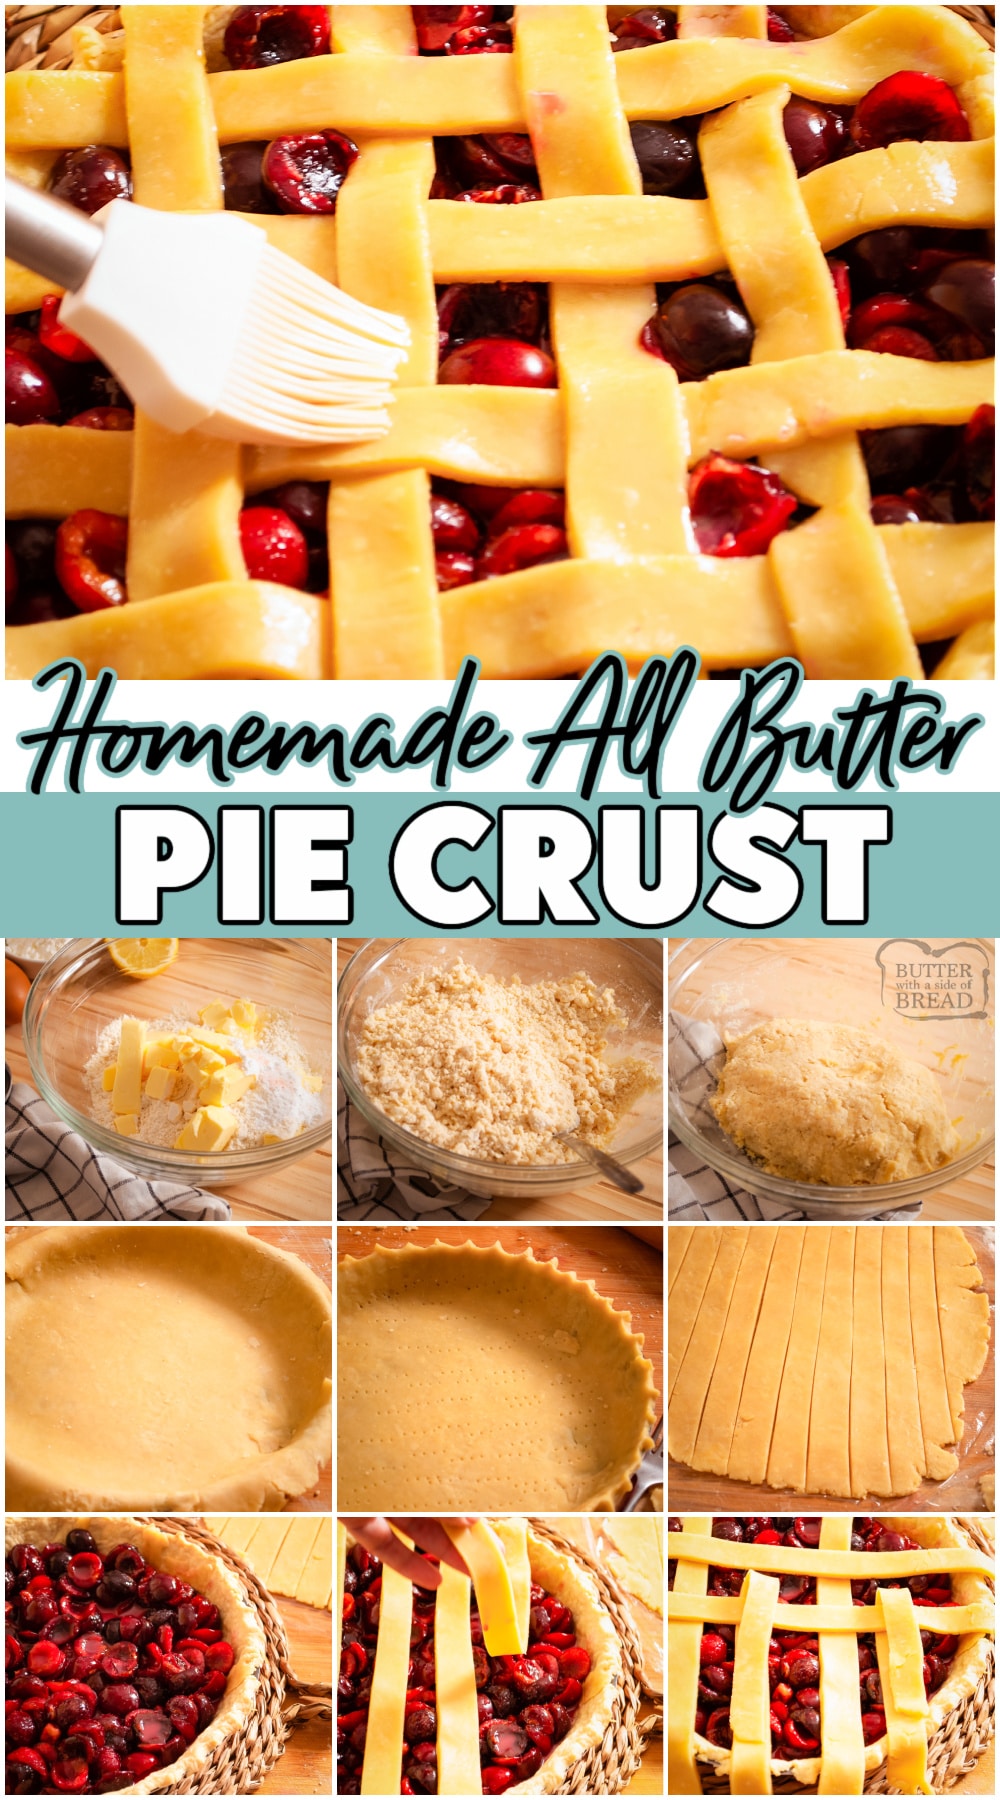 Easy no-knead recipe for the flakiest, homemade all-butter pie crust, perfect to make sweet or savory pies. #pie #piecrust #butter #baking #easyrecipe from BUTTER WITH A SIDE OF BREAD